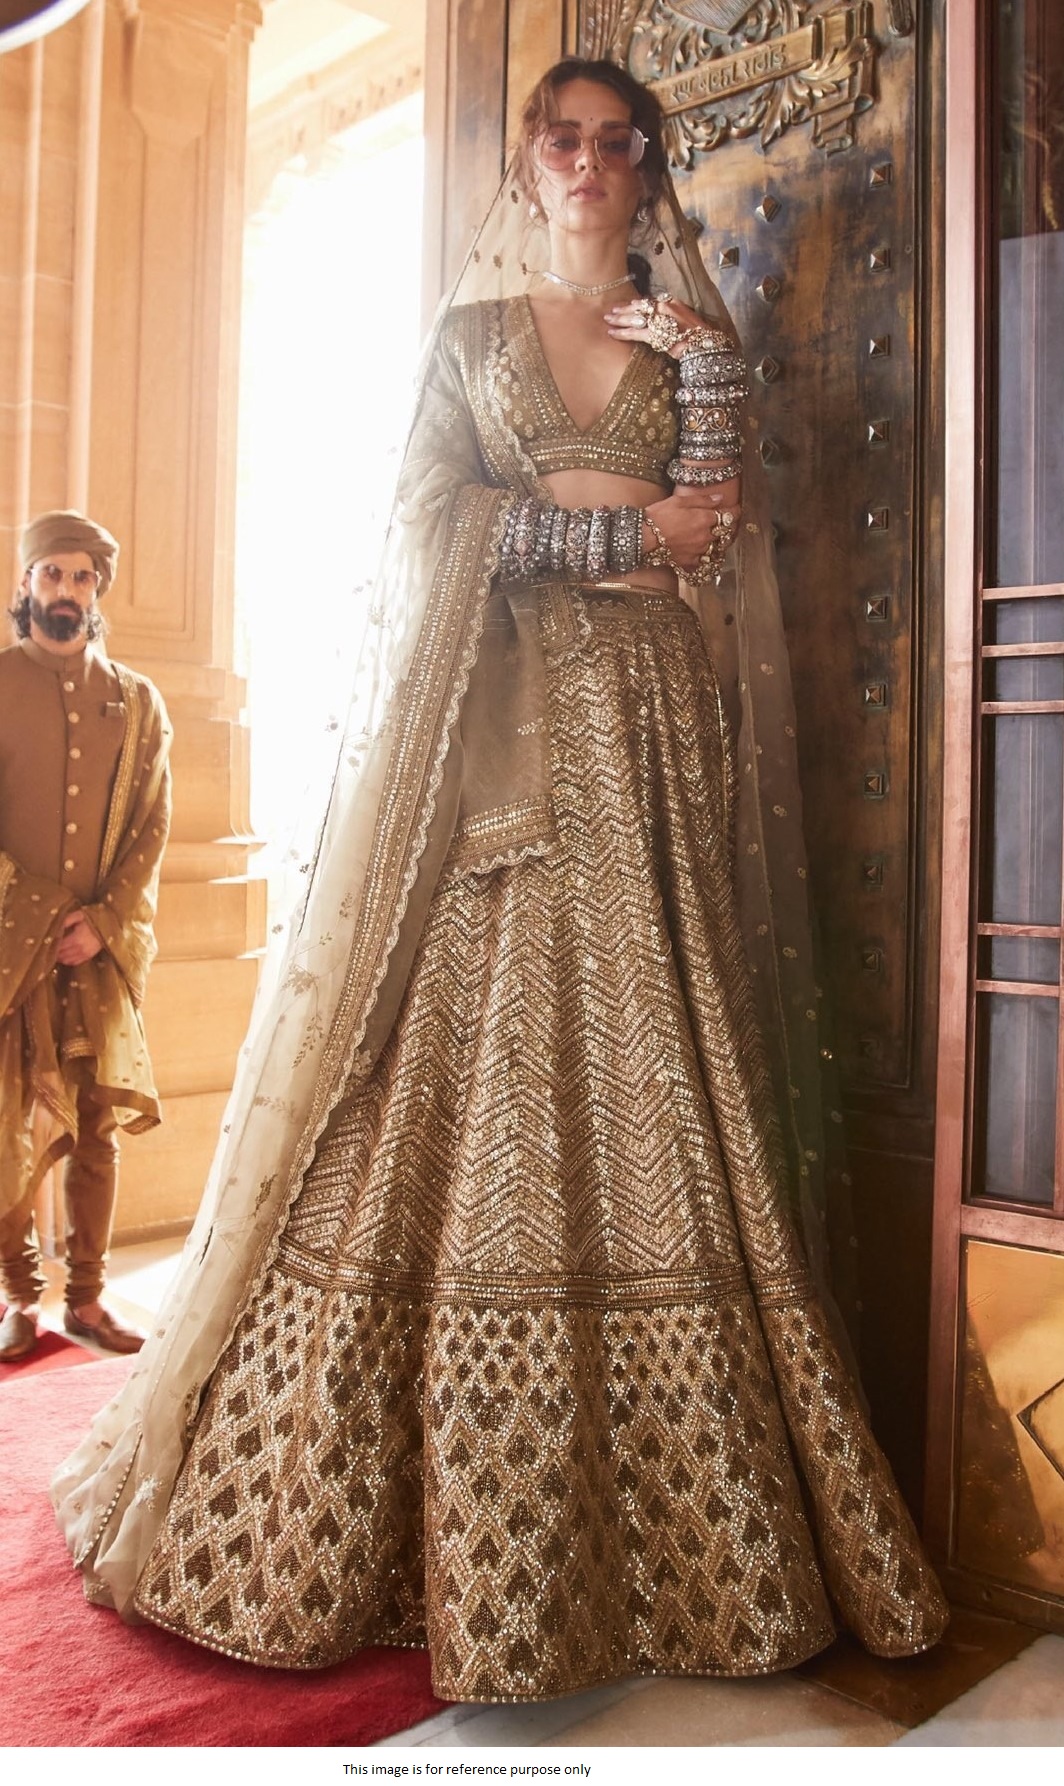 Katrina Kaif's pastel tulle Sabyasachi saree was made by 40 artisans in 75  days. Details here - India Today